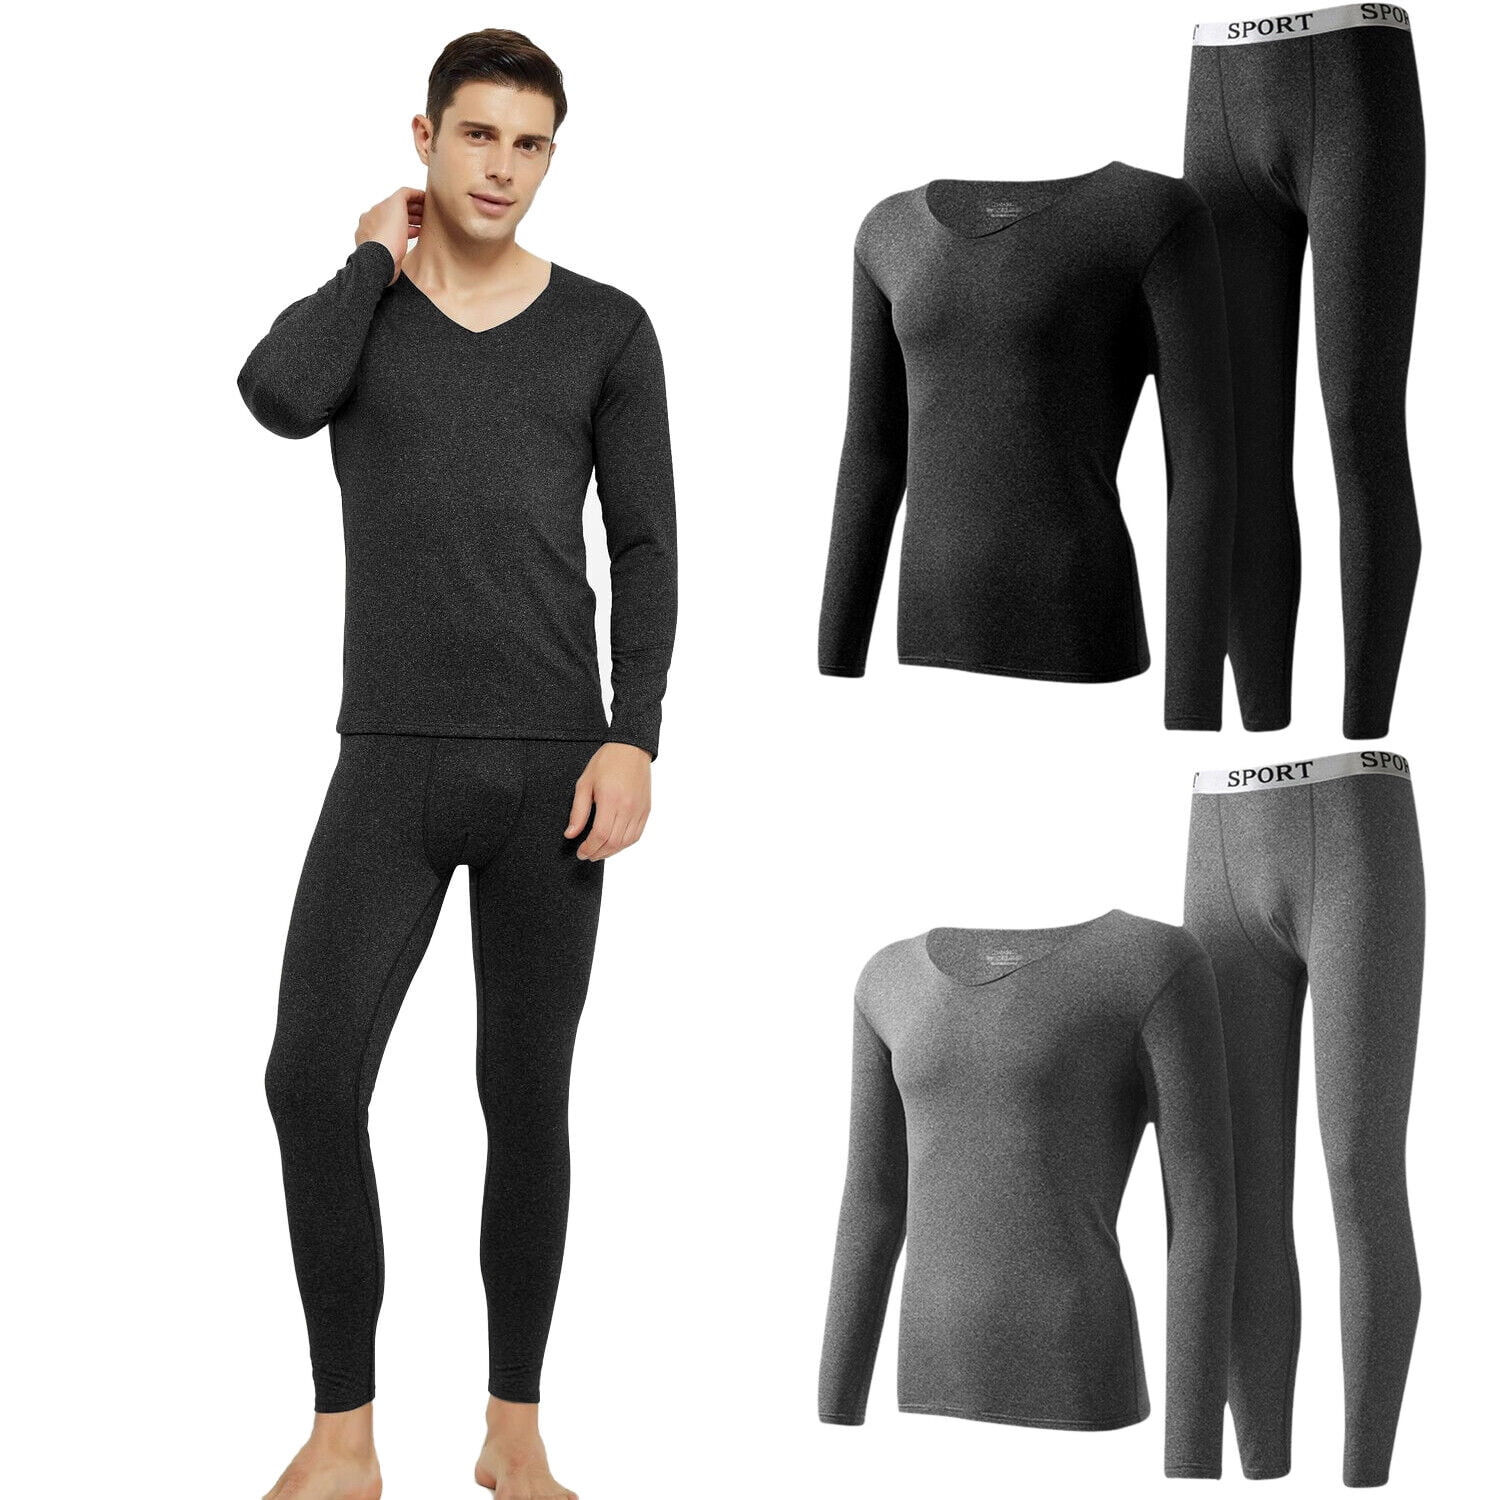 Men Thermal Underwear for Skiing Hunting, Winter Warm Fleece Lined Base ...